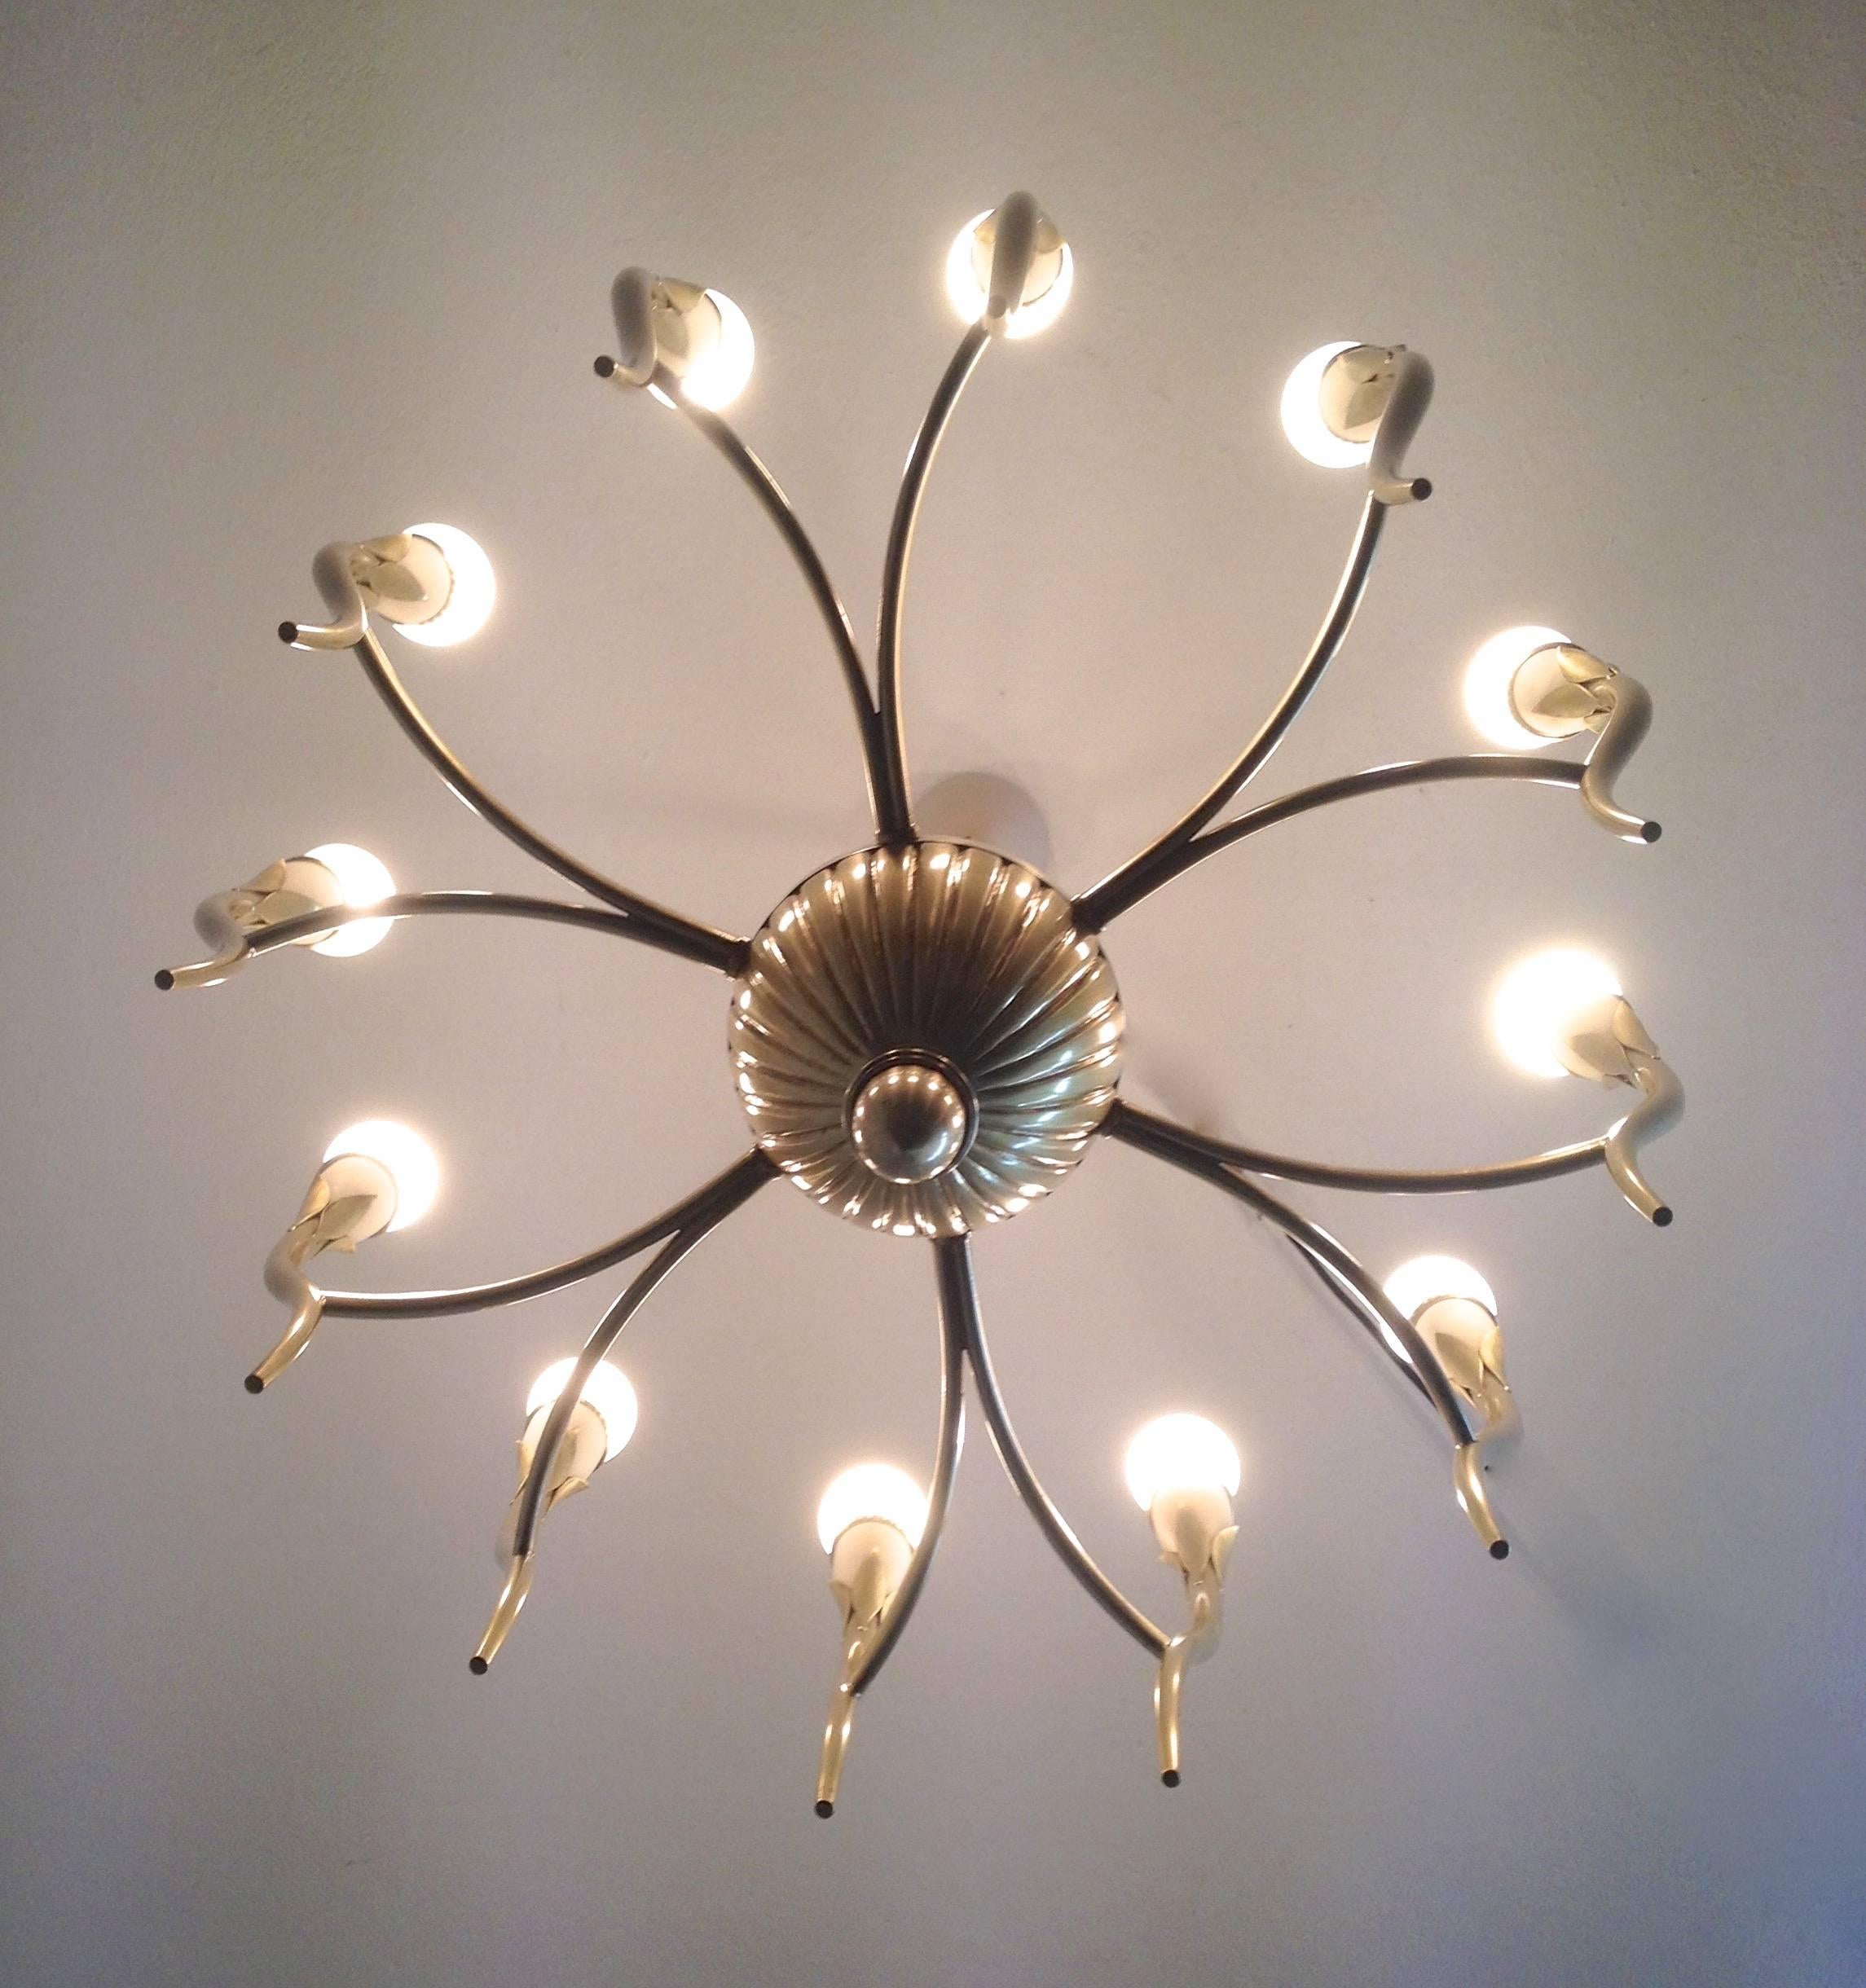 Six arms and twelve lights on curved thin lined sconces held together by the acorn shaped regency style center. This important Mid-Century Italian chandelier is quality made. The light fittings are made of lacquered metal as well as the ceiling